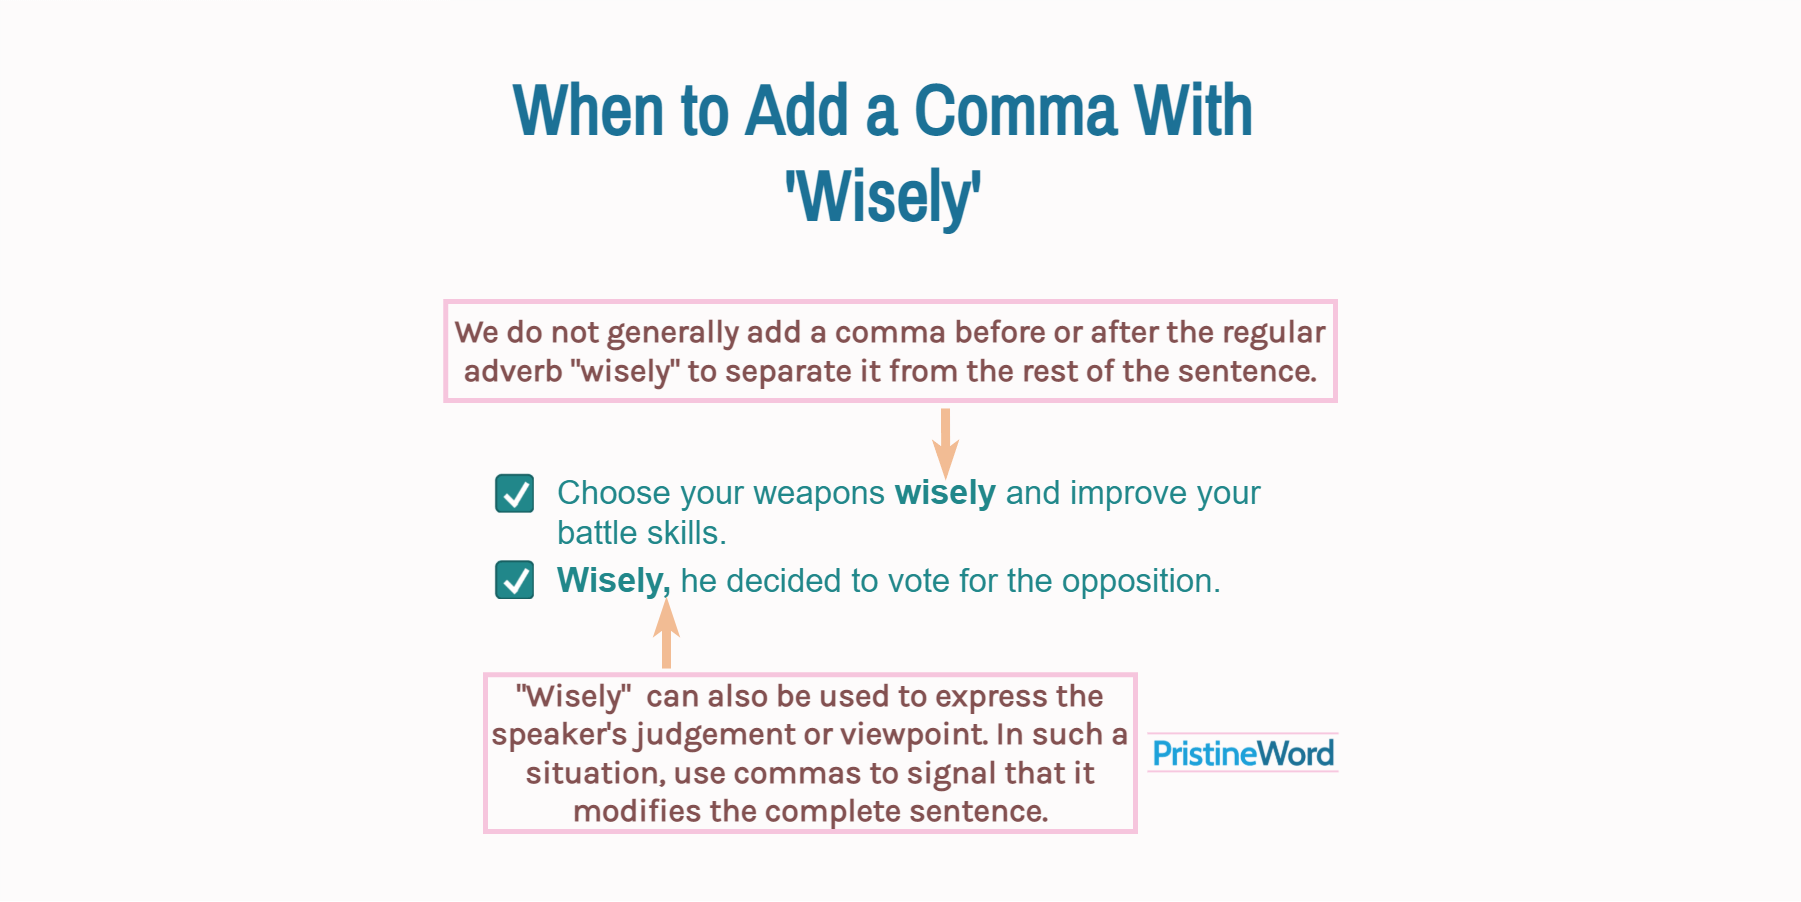 When to Use a Comma With 'Wisely'